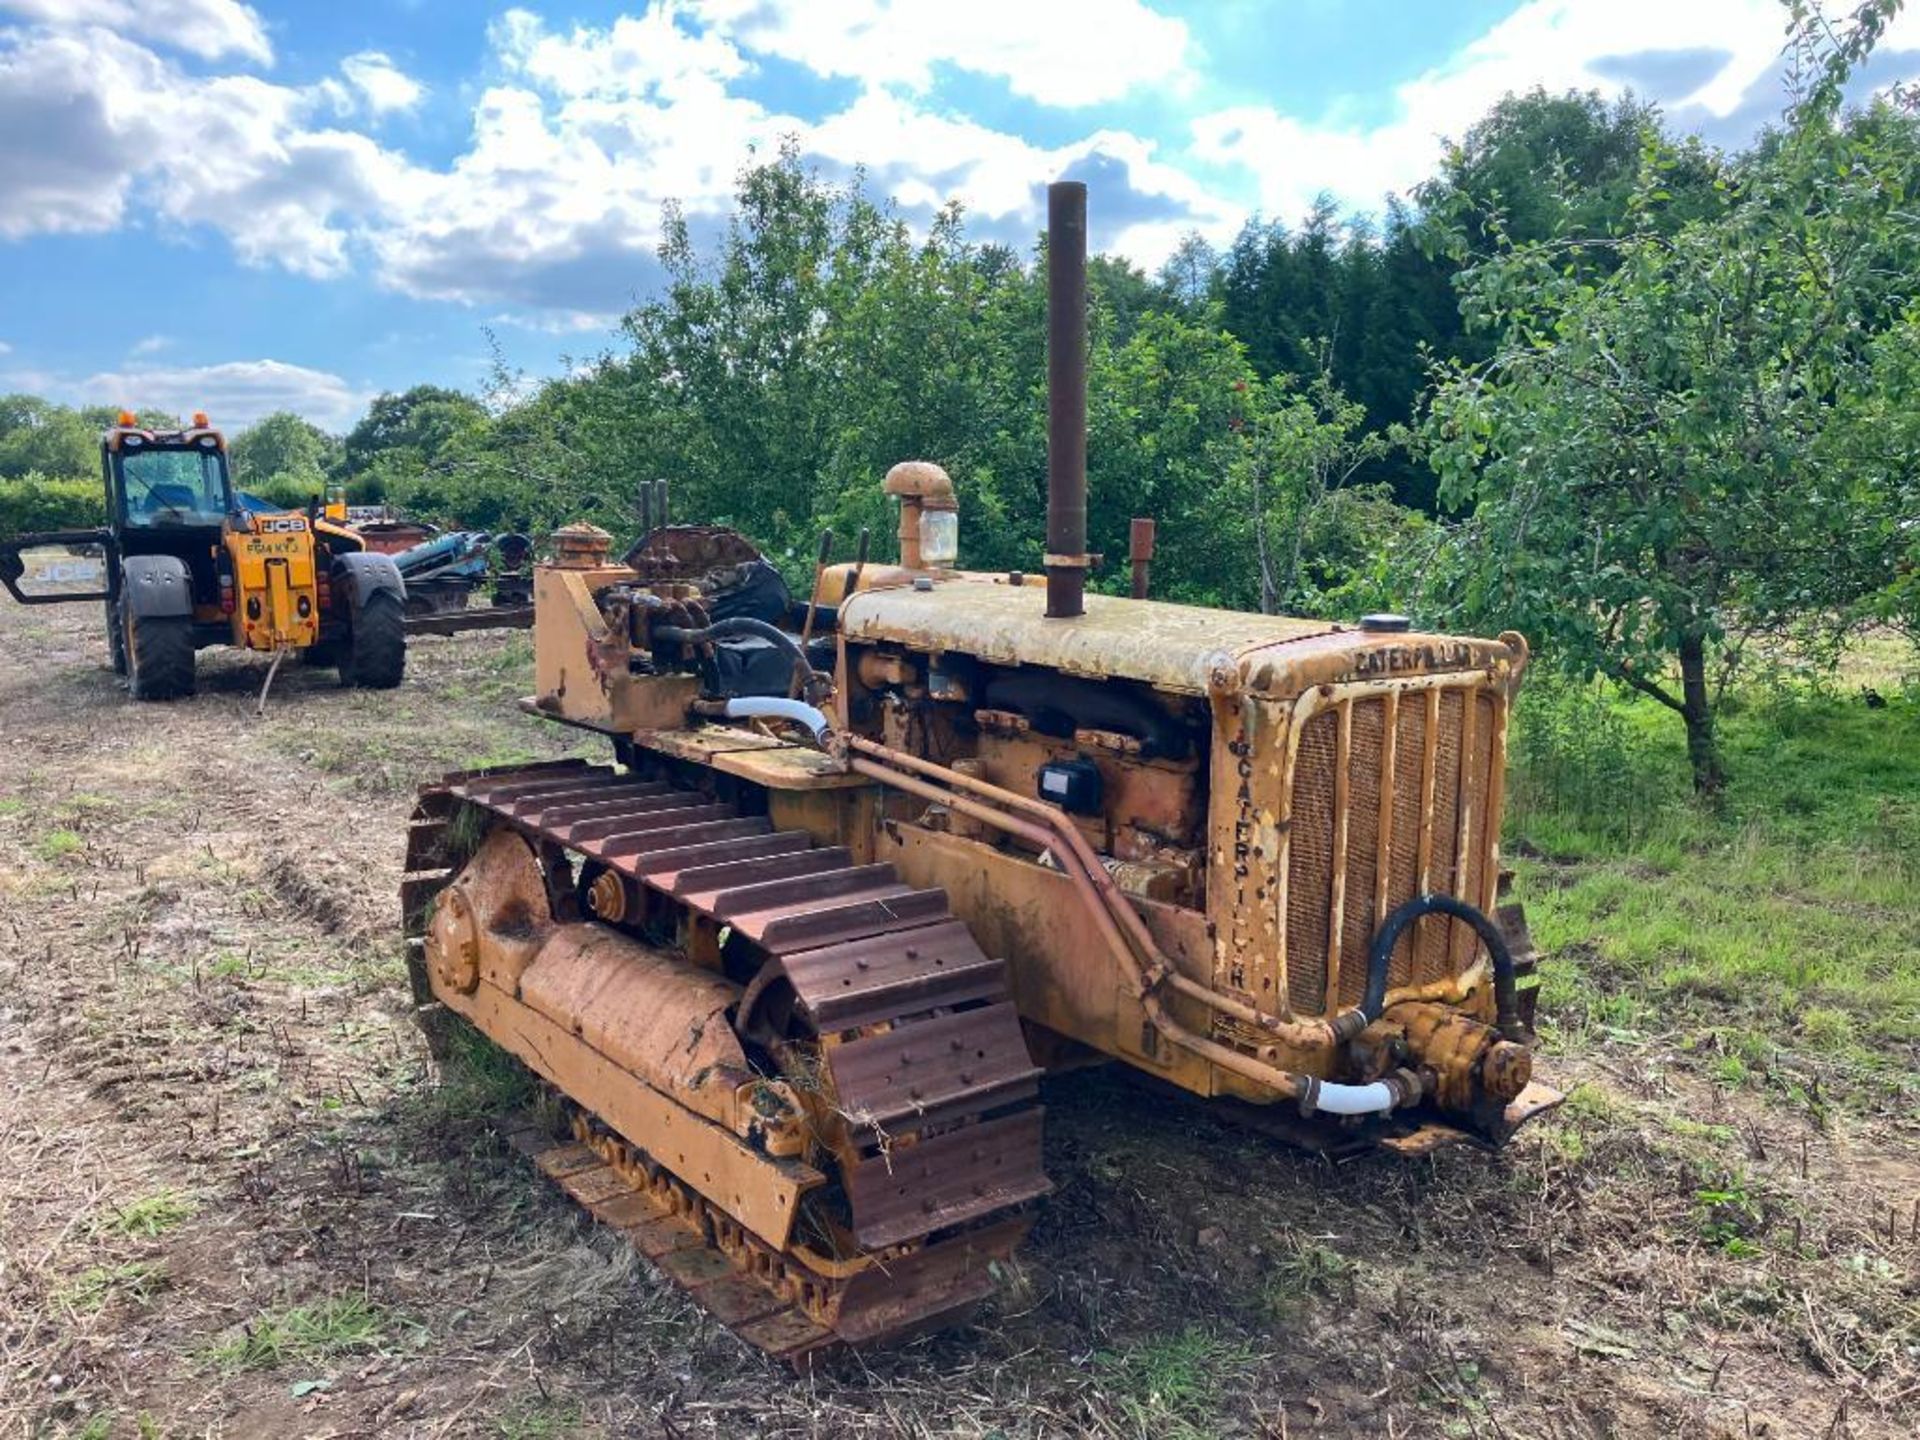 1948 Caterpillar D4 wide gauge metal tracked crawler with 16" tracks, swinging drawbar and 2 rear sp - Image 12 of 12